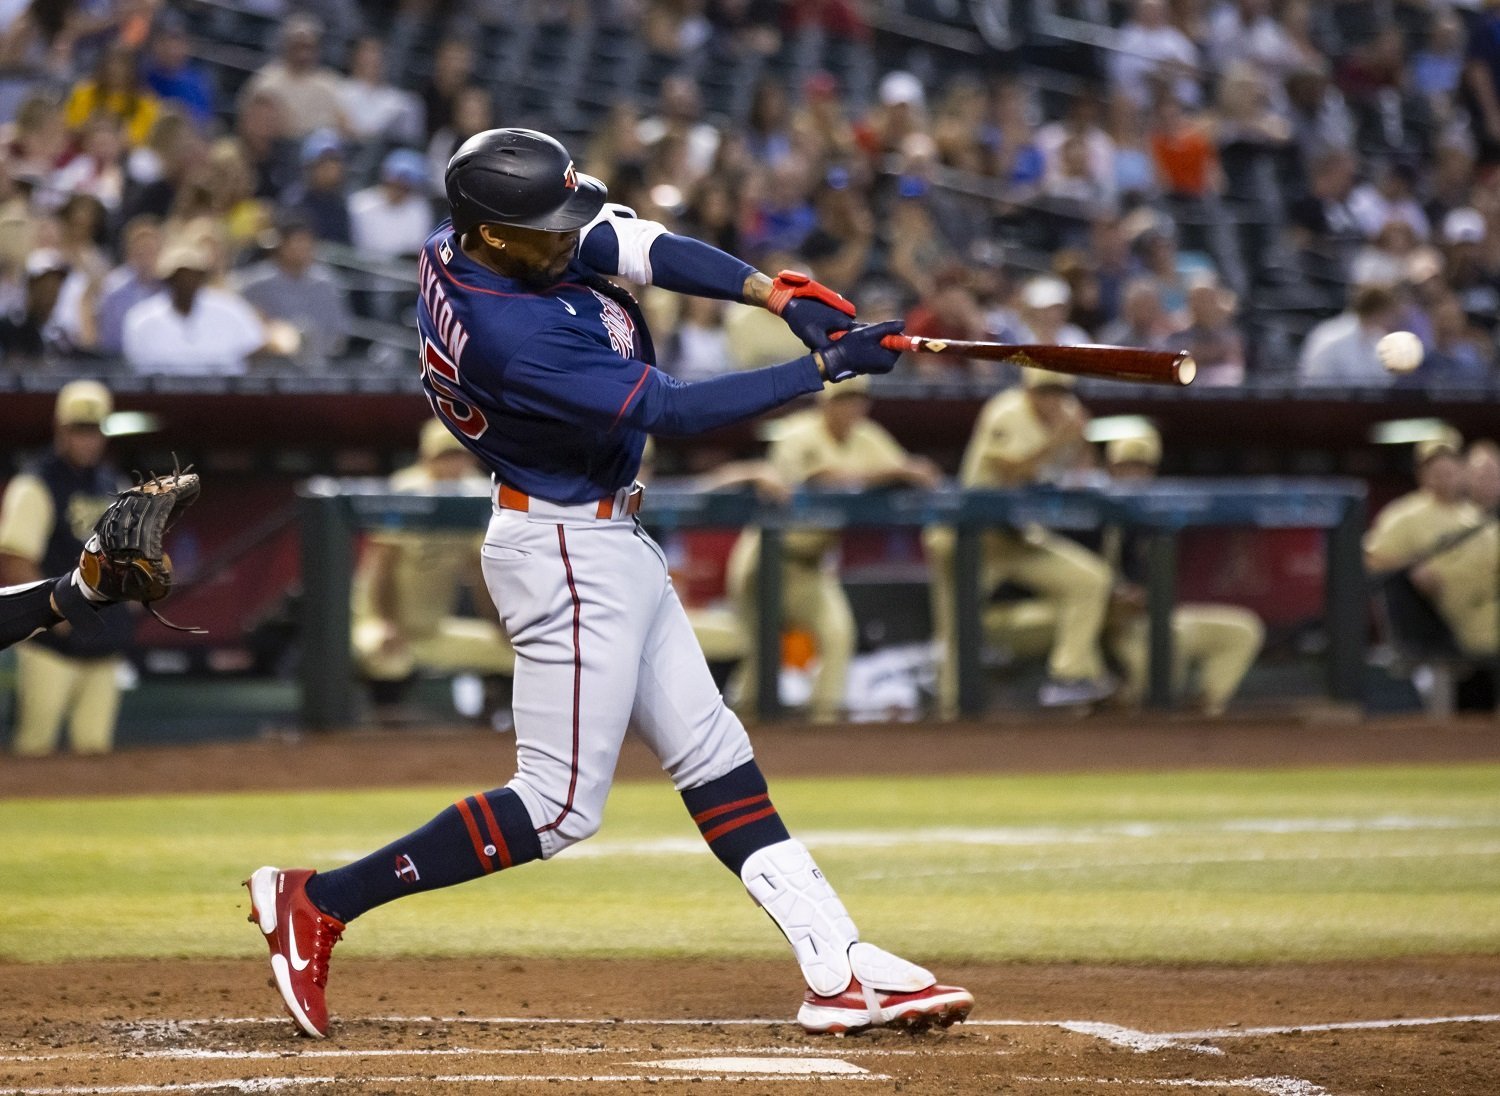 Byron Buxton says he's been cleared to run, on path for spring training